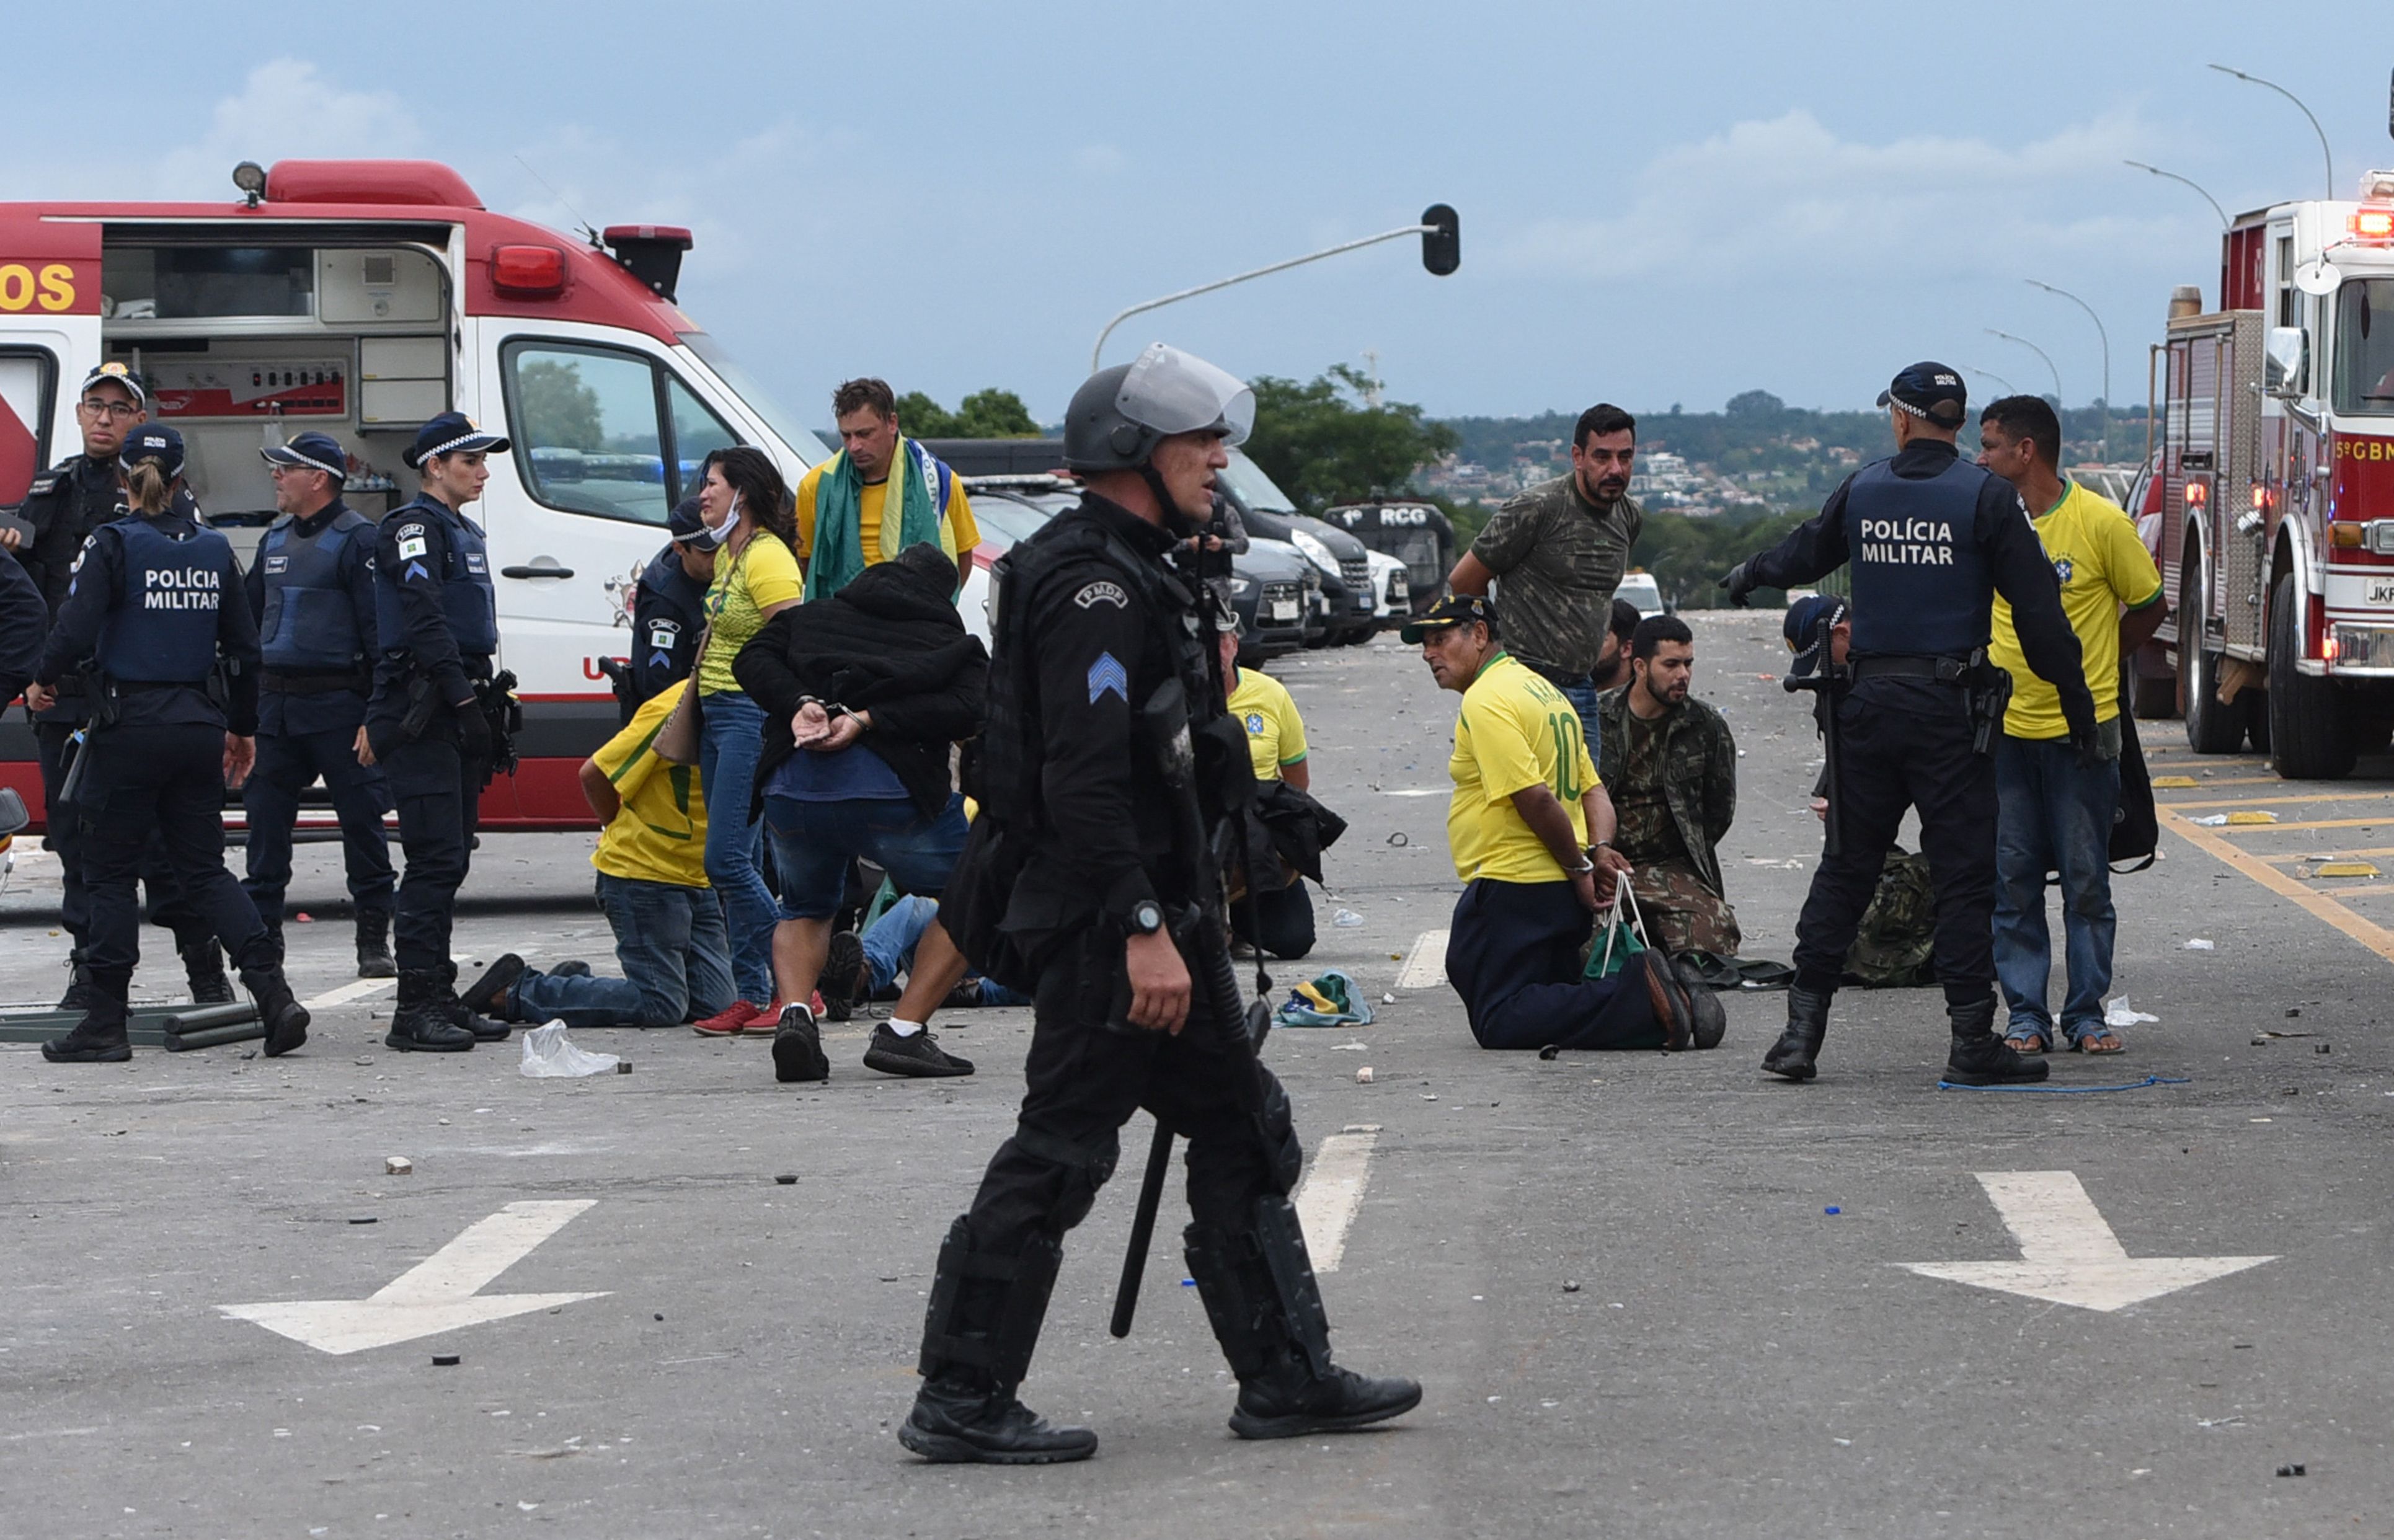 Security forces arrest Bolsonaro supporters after retaking control of Planalto Presidential Palace in Brasilia on Jan. 8.